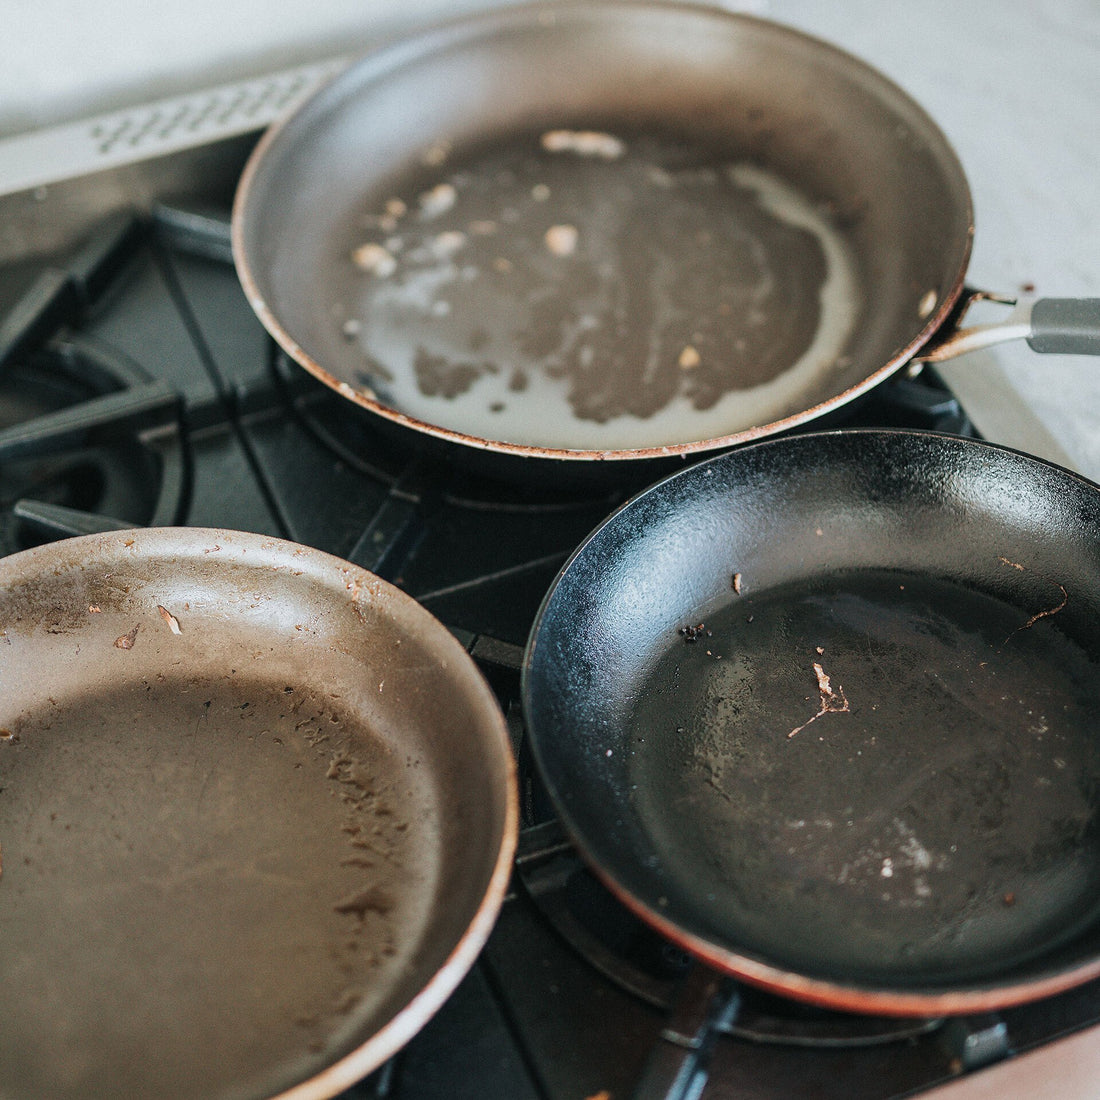 Why You Should Only Be Using PFOA Free Pots and Pans